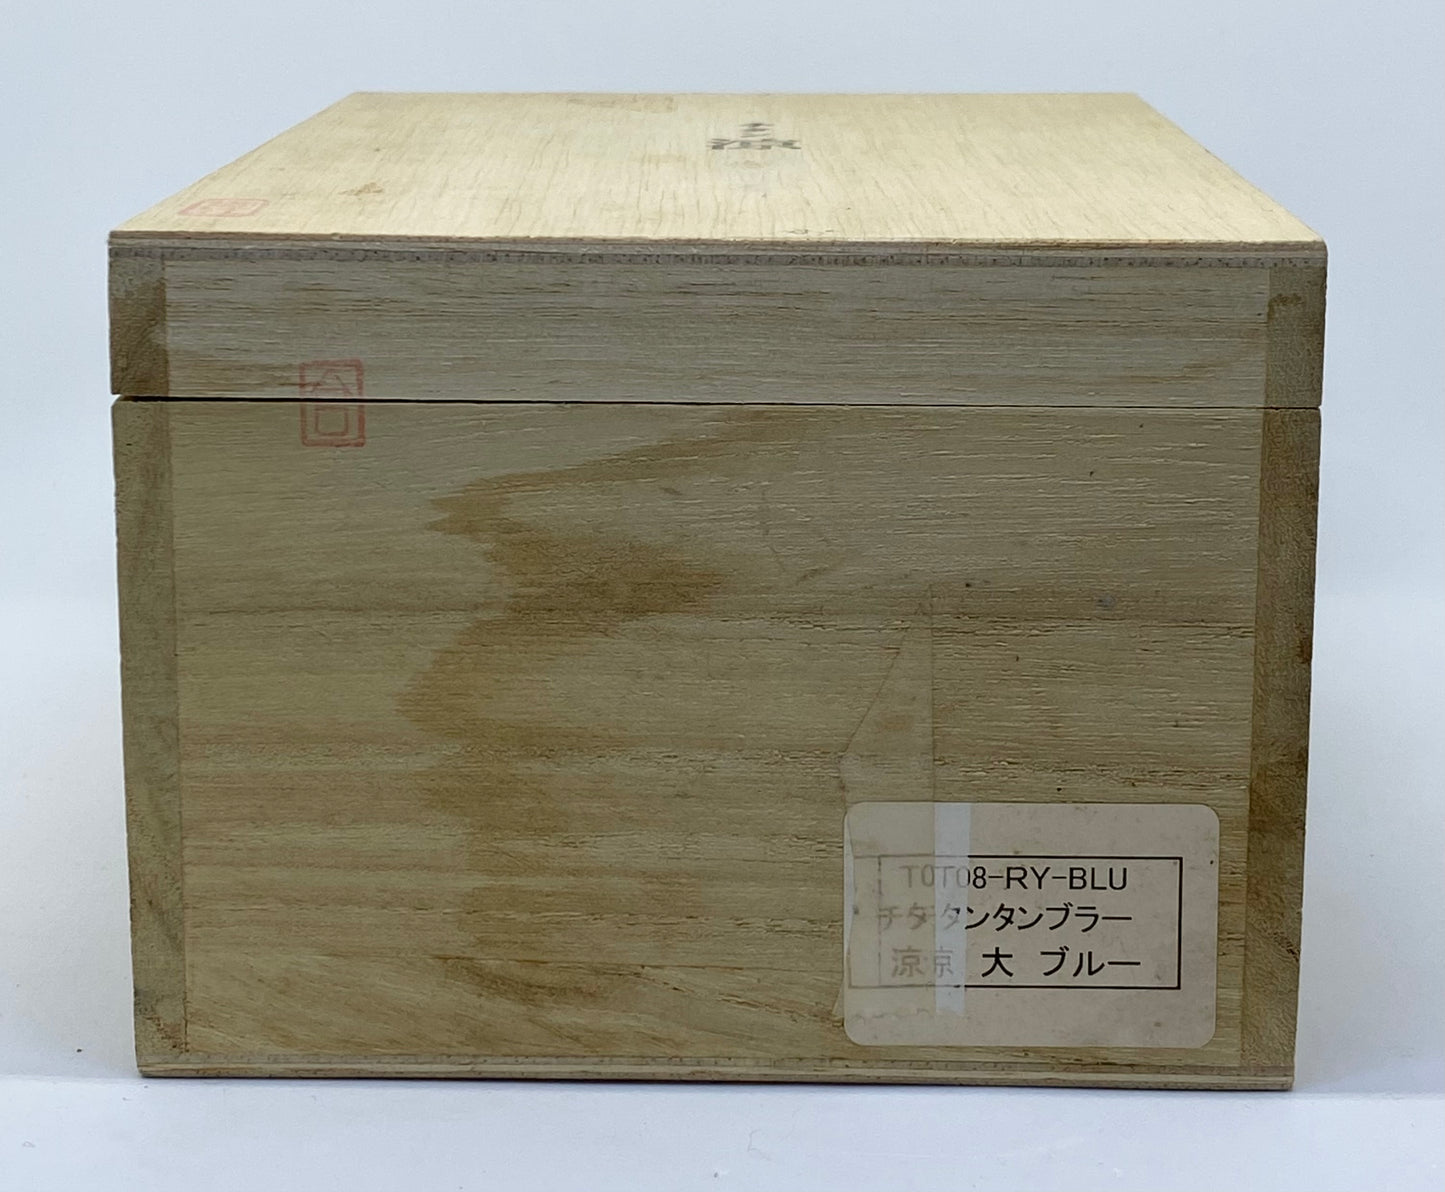 Highly collectable!! Japanese Horie Titanium Anodised Tumbler with original box and papers